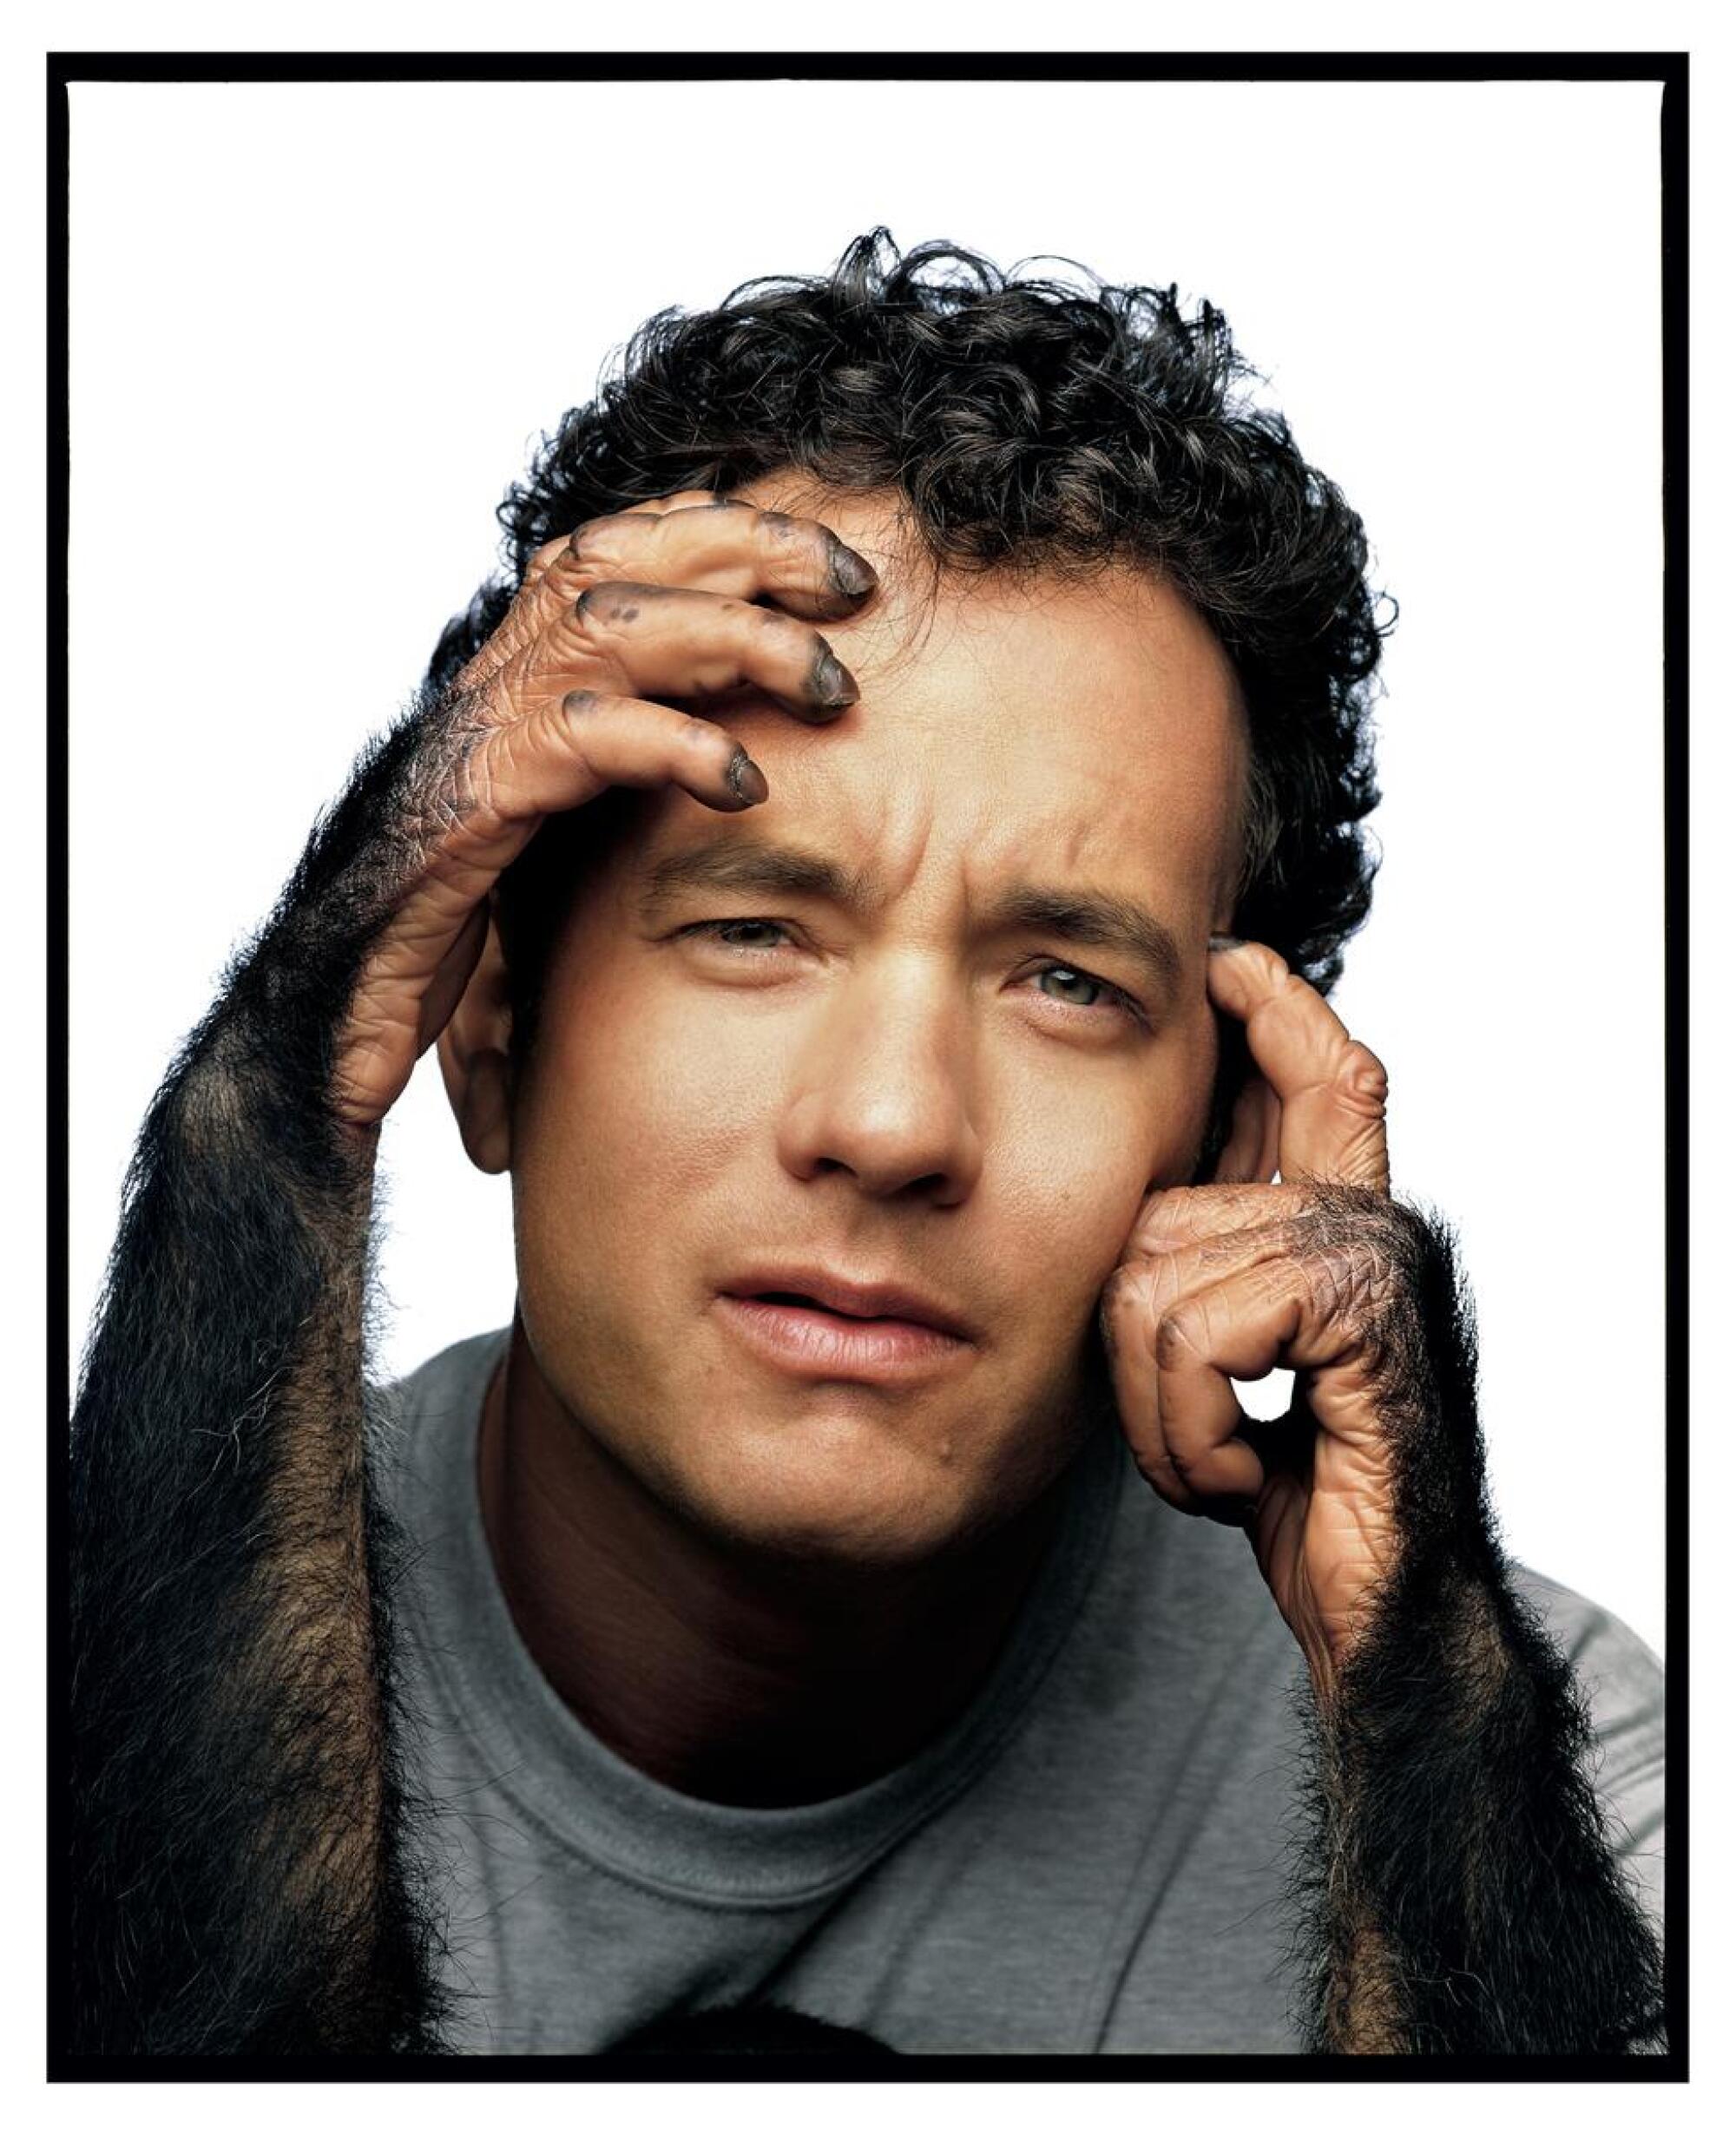 Tom Hanks, photographed on June 6, 1994, for an US magazine cover story that August.